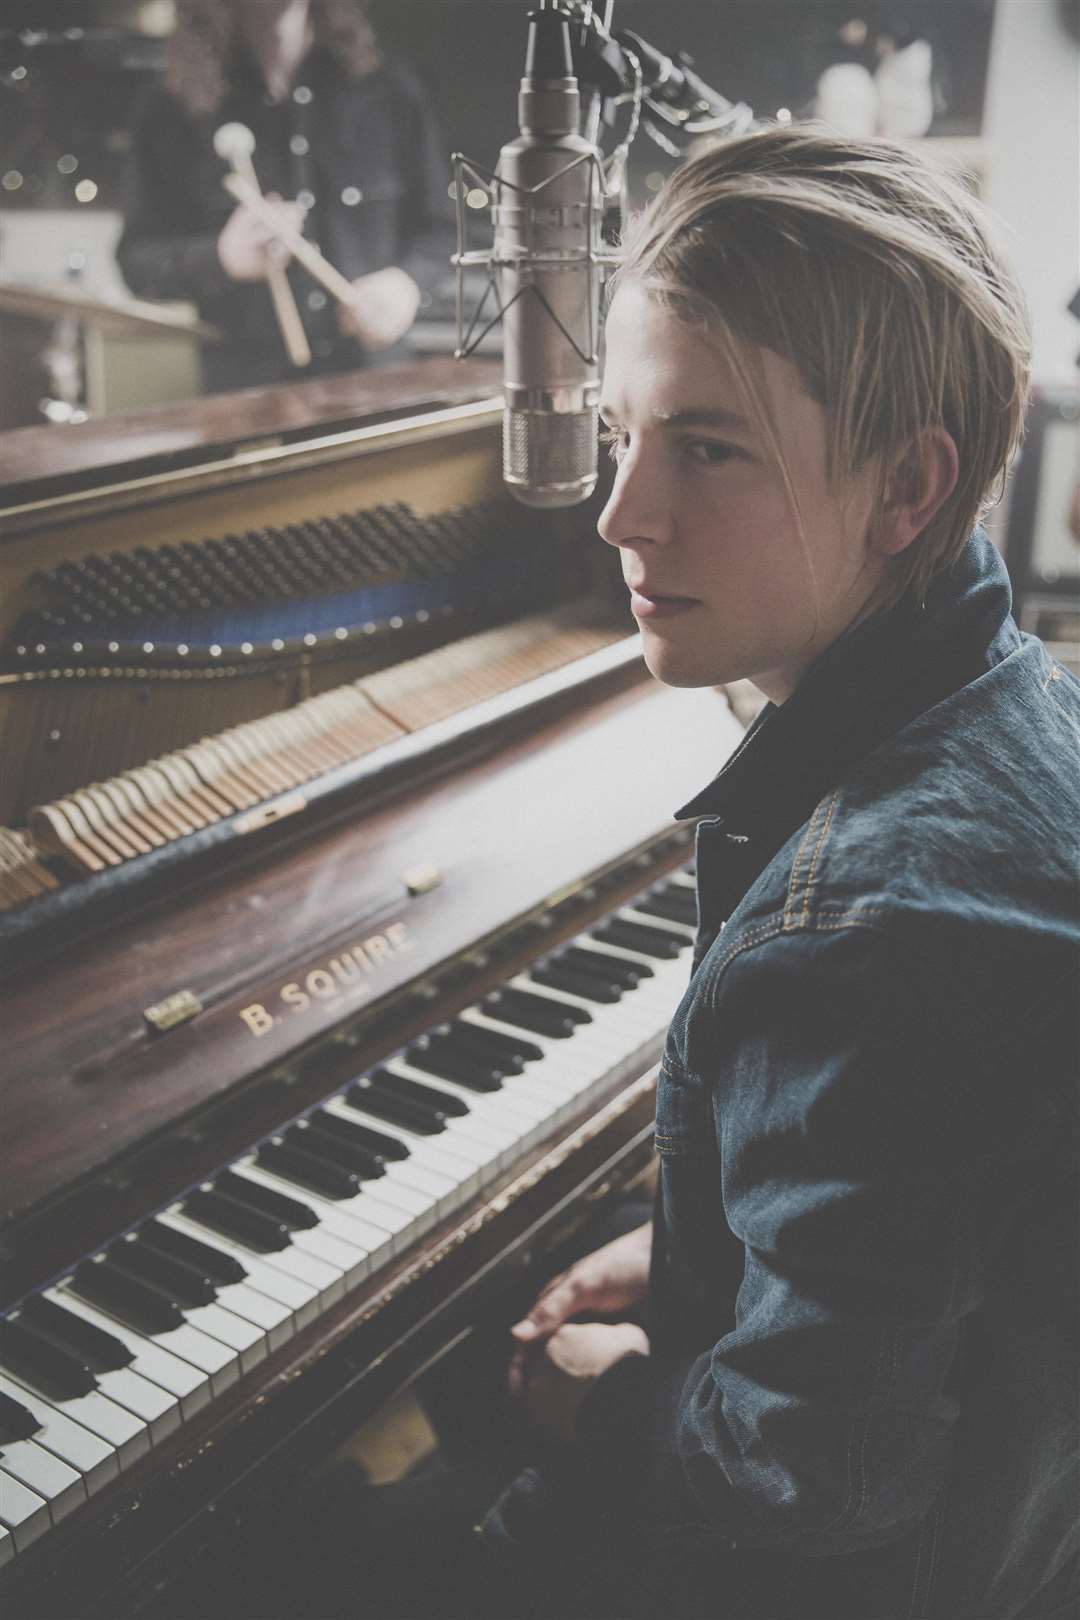 Tom Odell will be among the line-up for live music at Pub in the Park